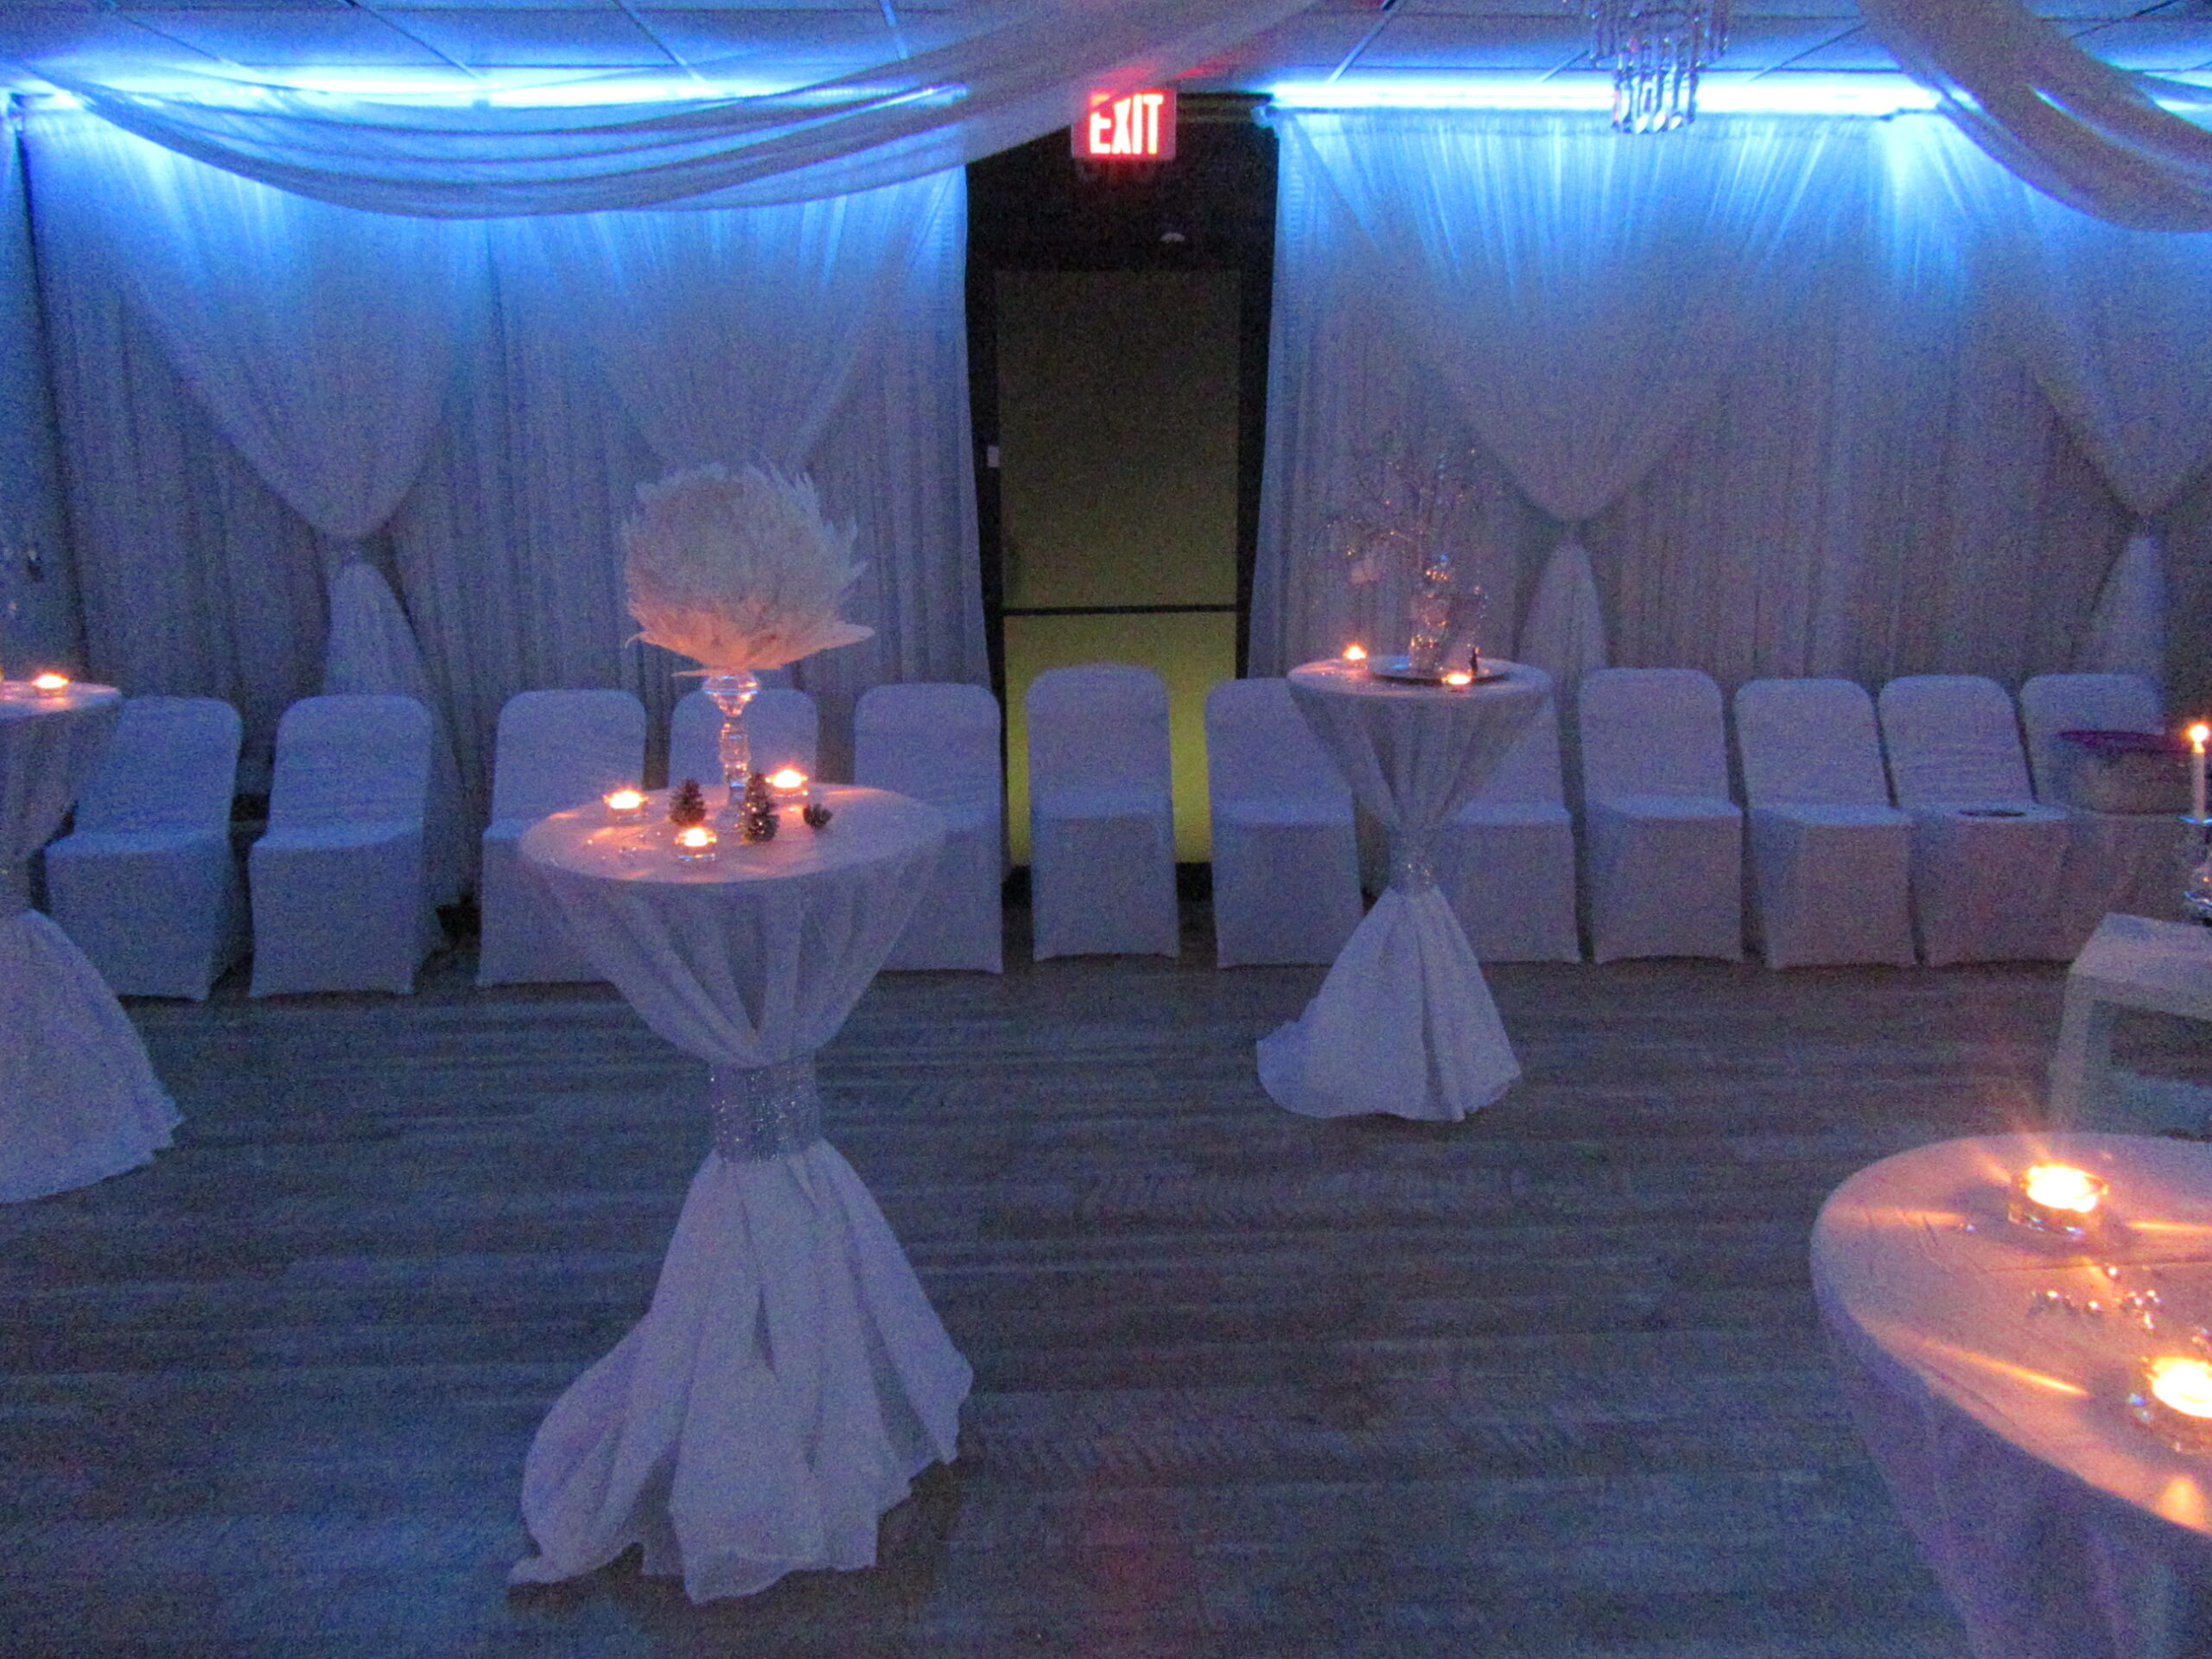 A dimly lit event room with draped white linens, round tables covered with white cloths, and chairs wrapped in white with centerpieces featuring lit candles and floral decorations.